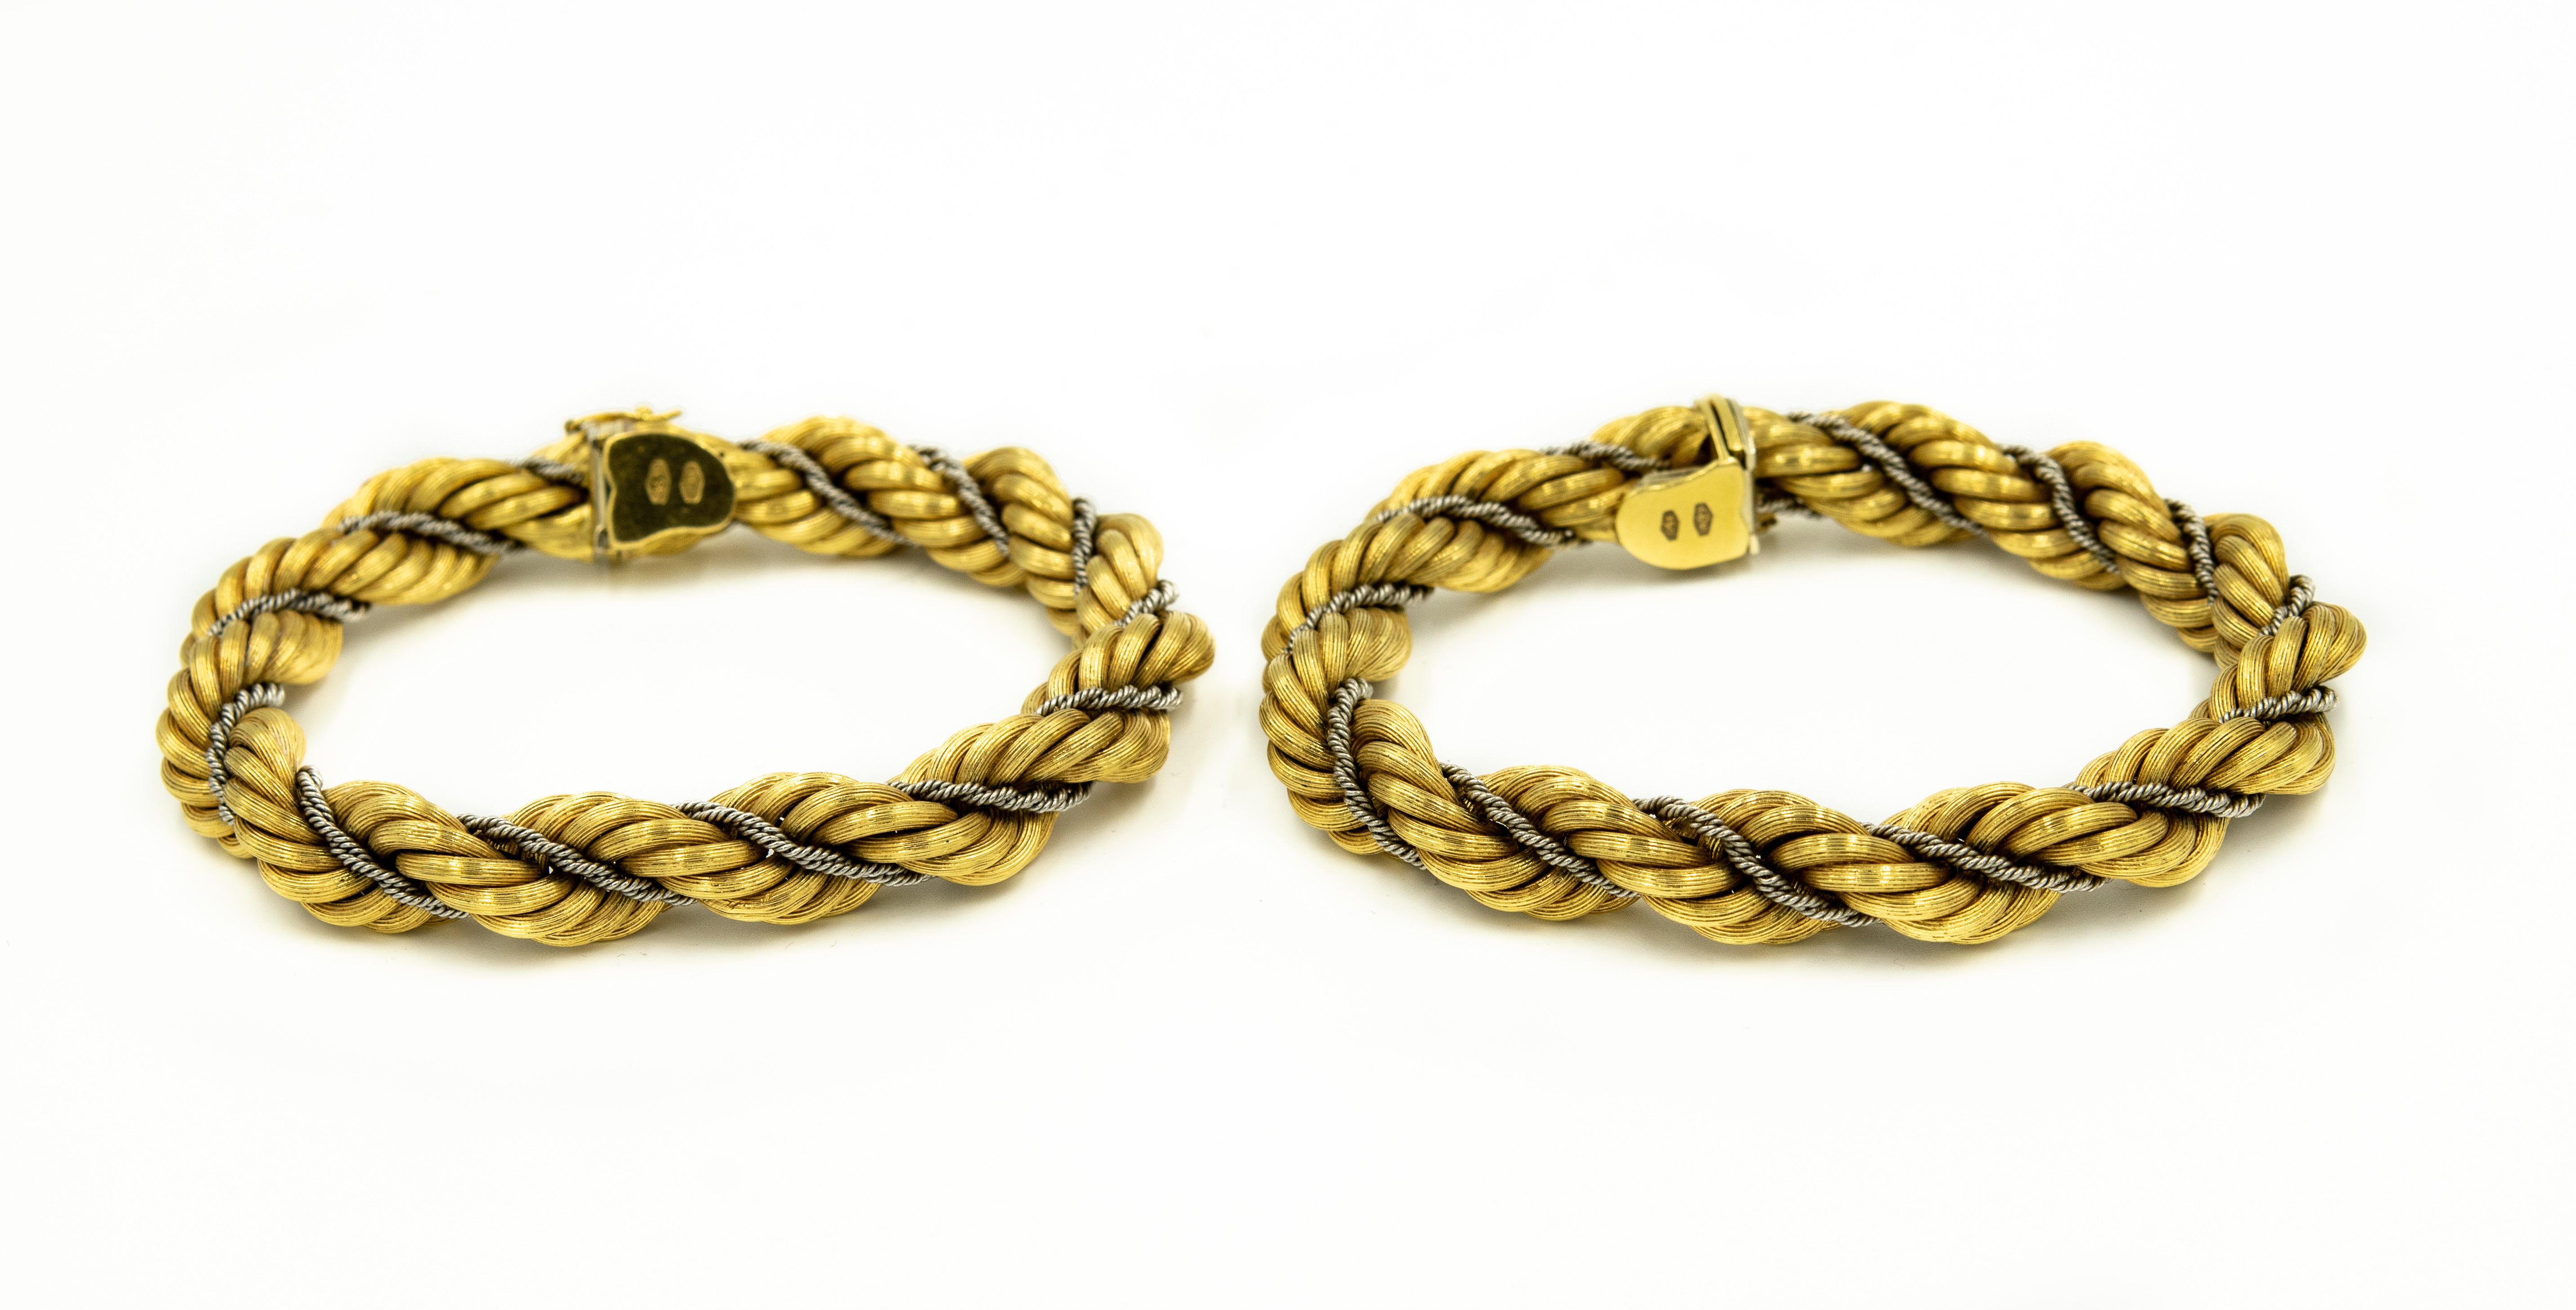 Nicolis Cola Italian Twisted White and Yellow Gold Rope 2 Bracelets or Necklace For Sale